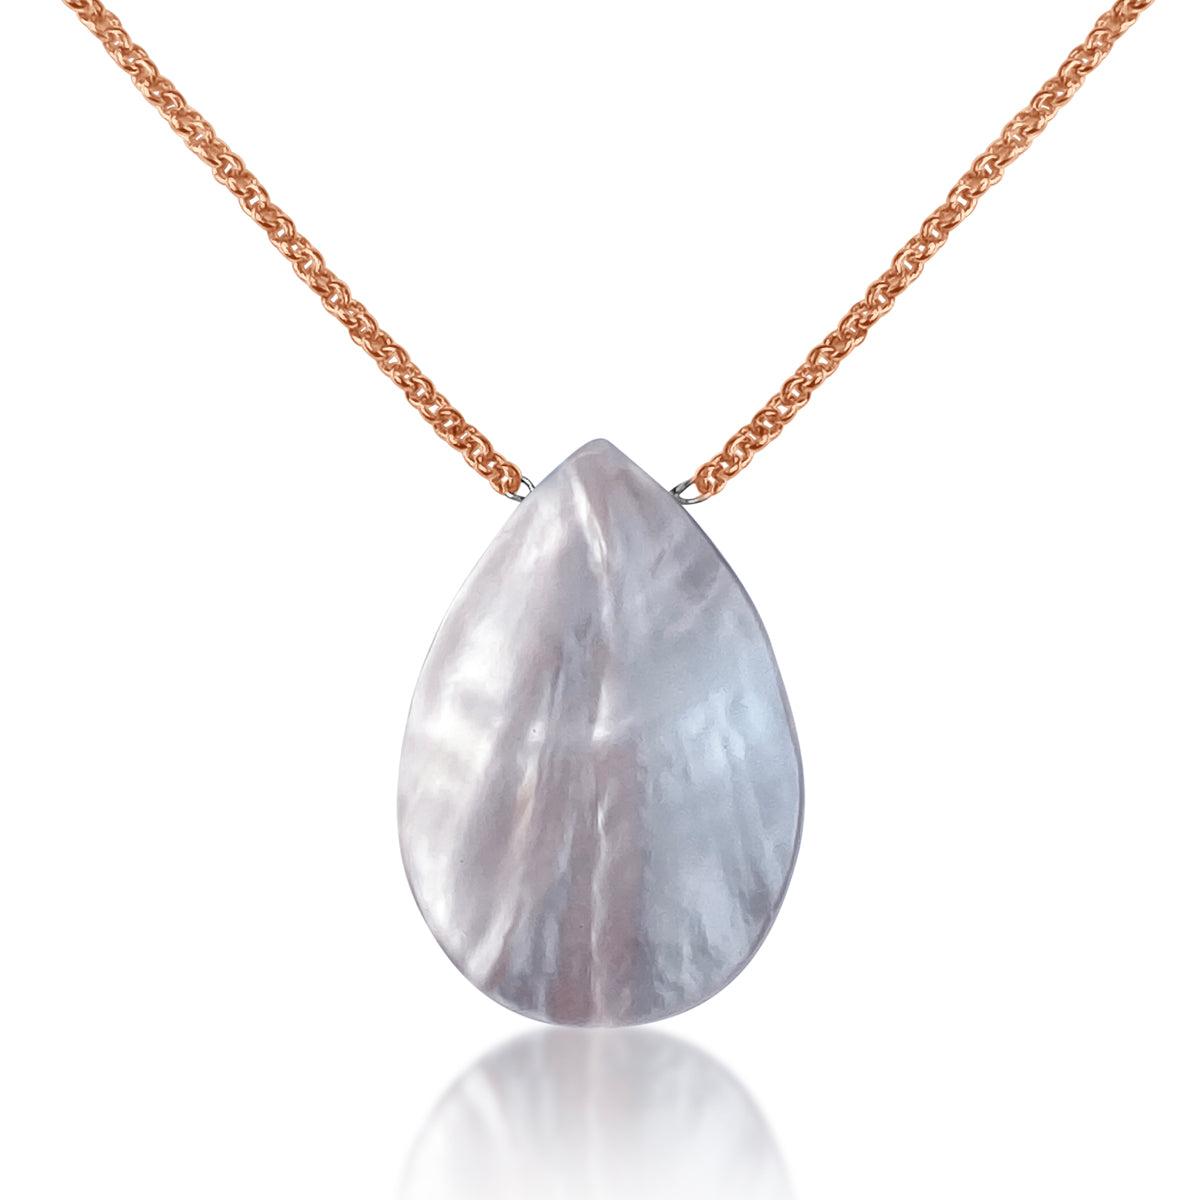 Awakening the Divine Feminine White Abalone Necklace.  The Abalone Shell is a perfect gift for those who have survived traumatic experiences, to let them know that while they may have been tossed and turned themselves as the shell has been in the sea, in the end, they are only more beautiful for it.